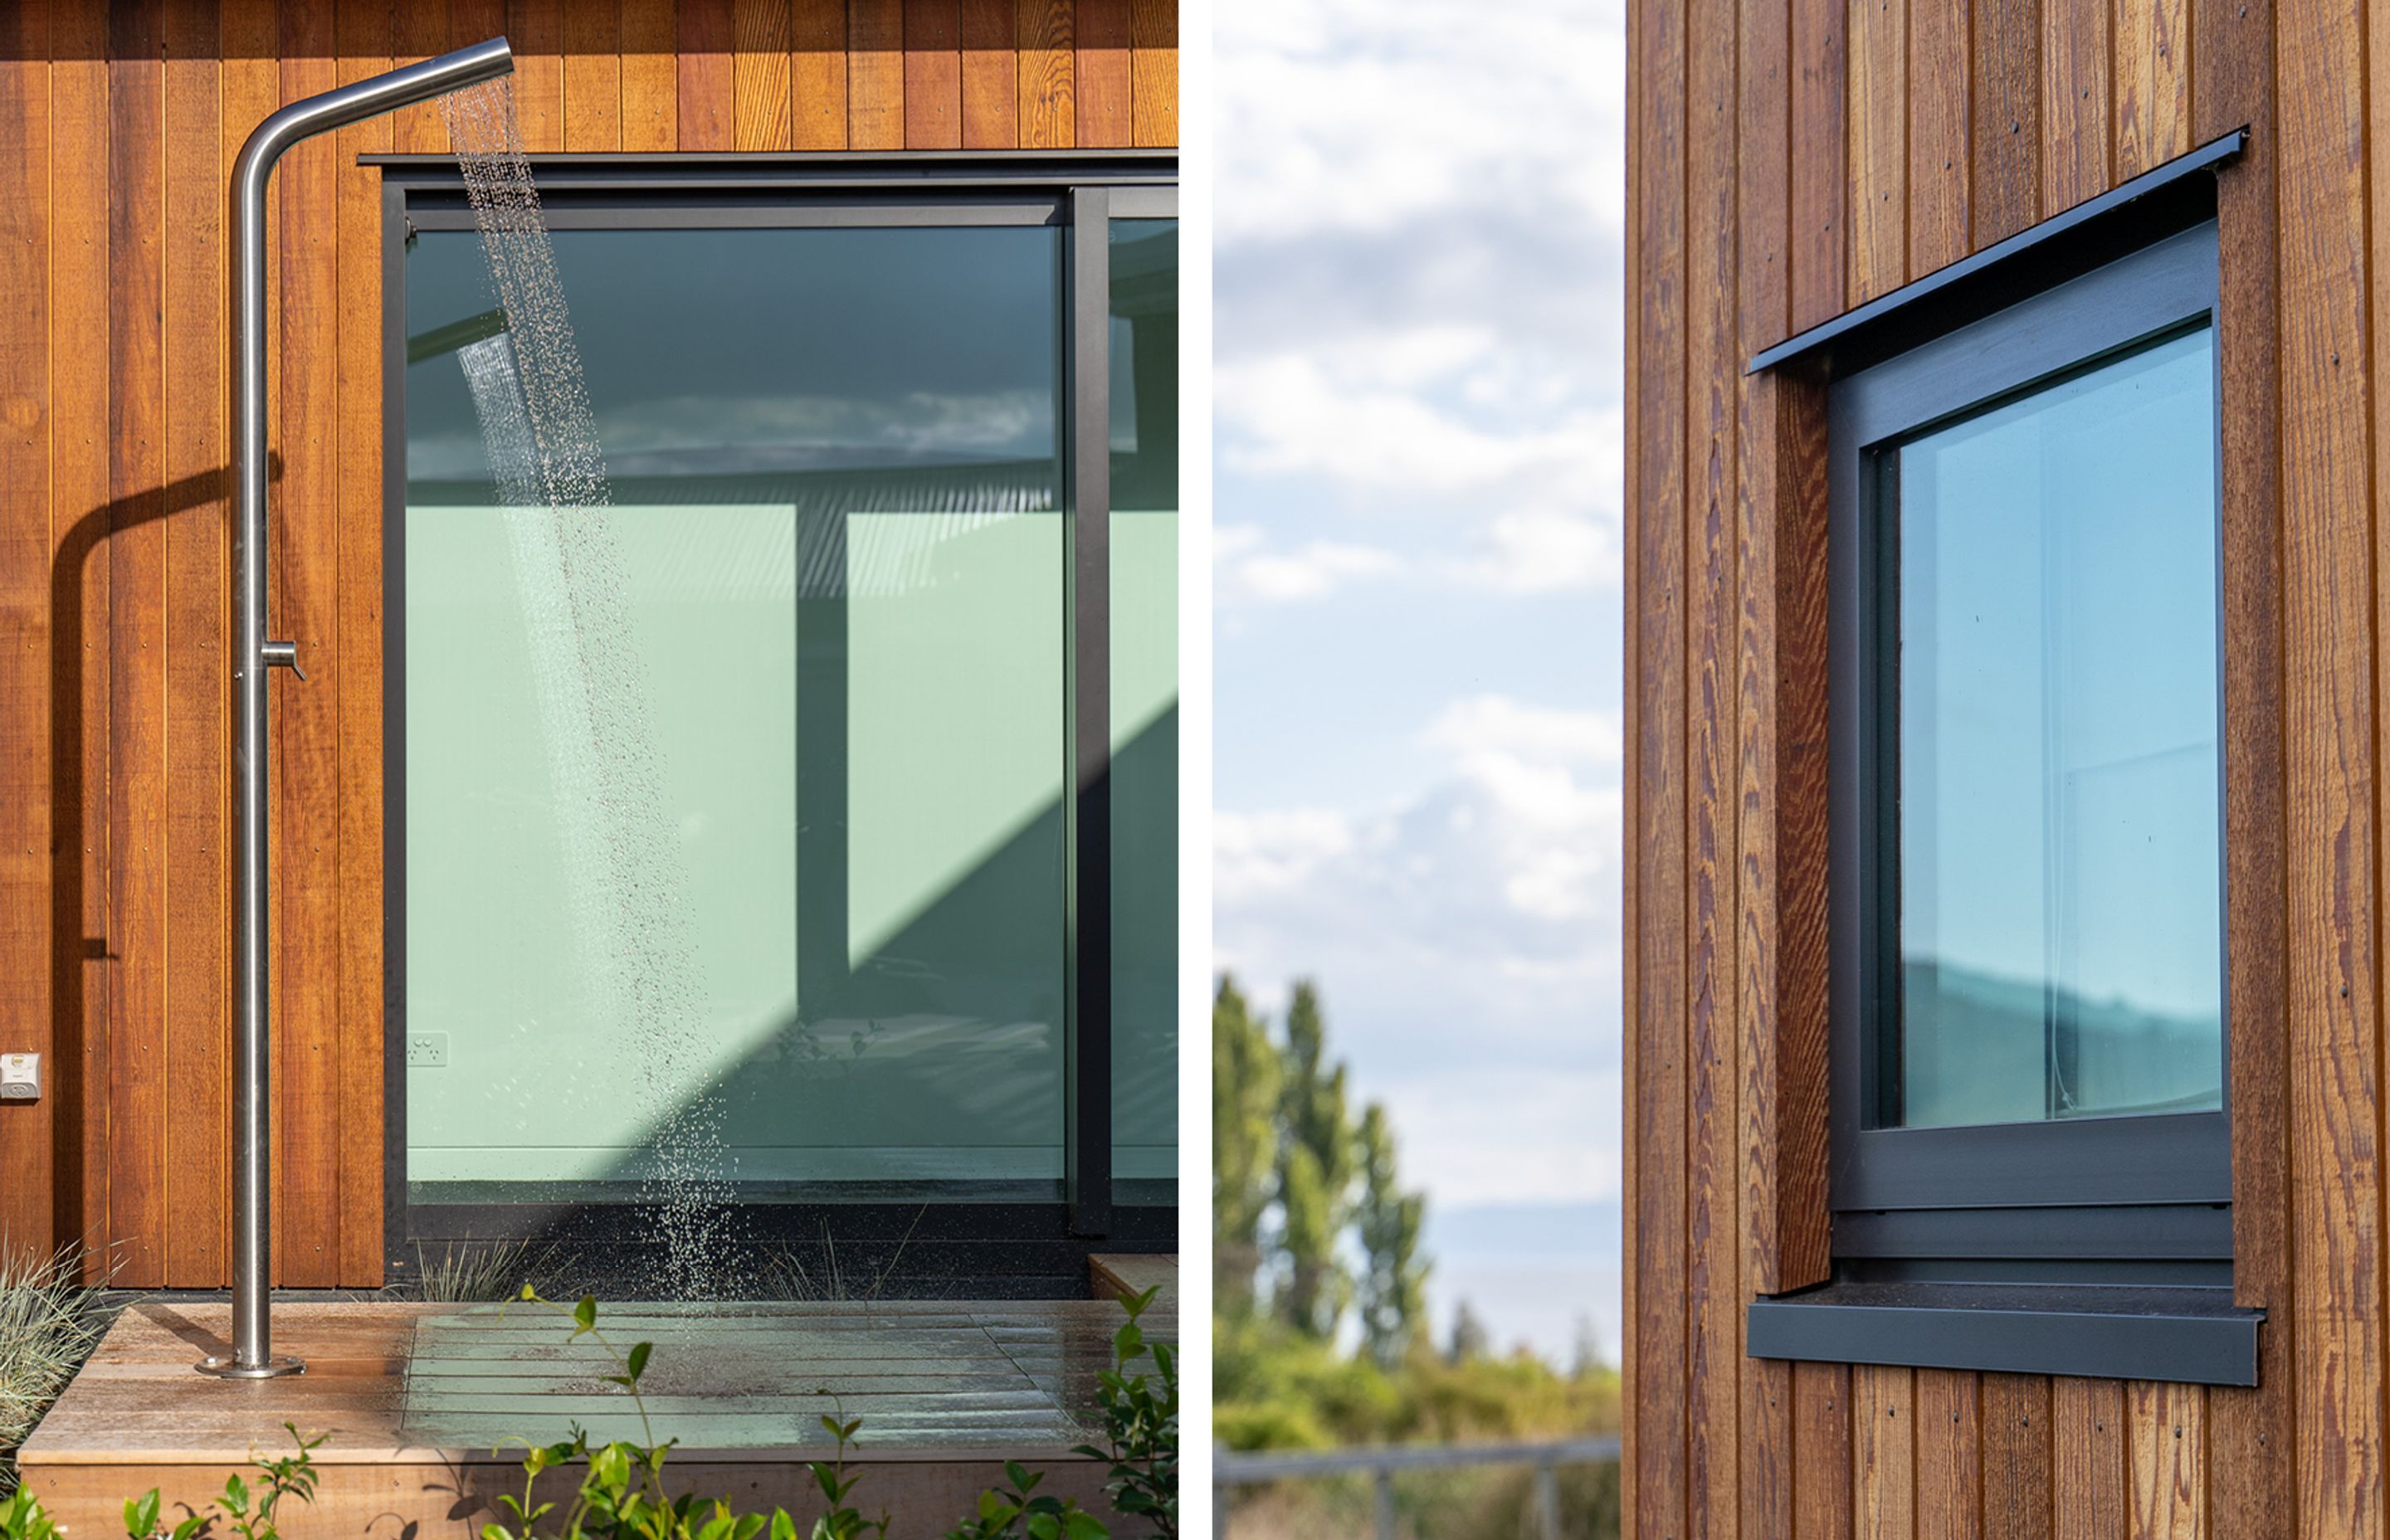 The INTERSET Recessed Window Flashing System consists of a set of interlinked flashings and stop-ends that create a 65mm window recess allowing standard aluminium windows to be recessed to the framing line from the outer façade, resulting in a clean, cont